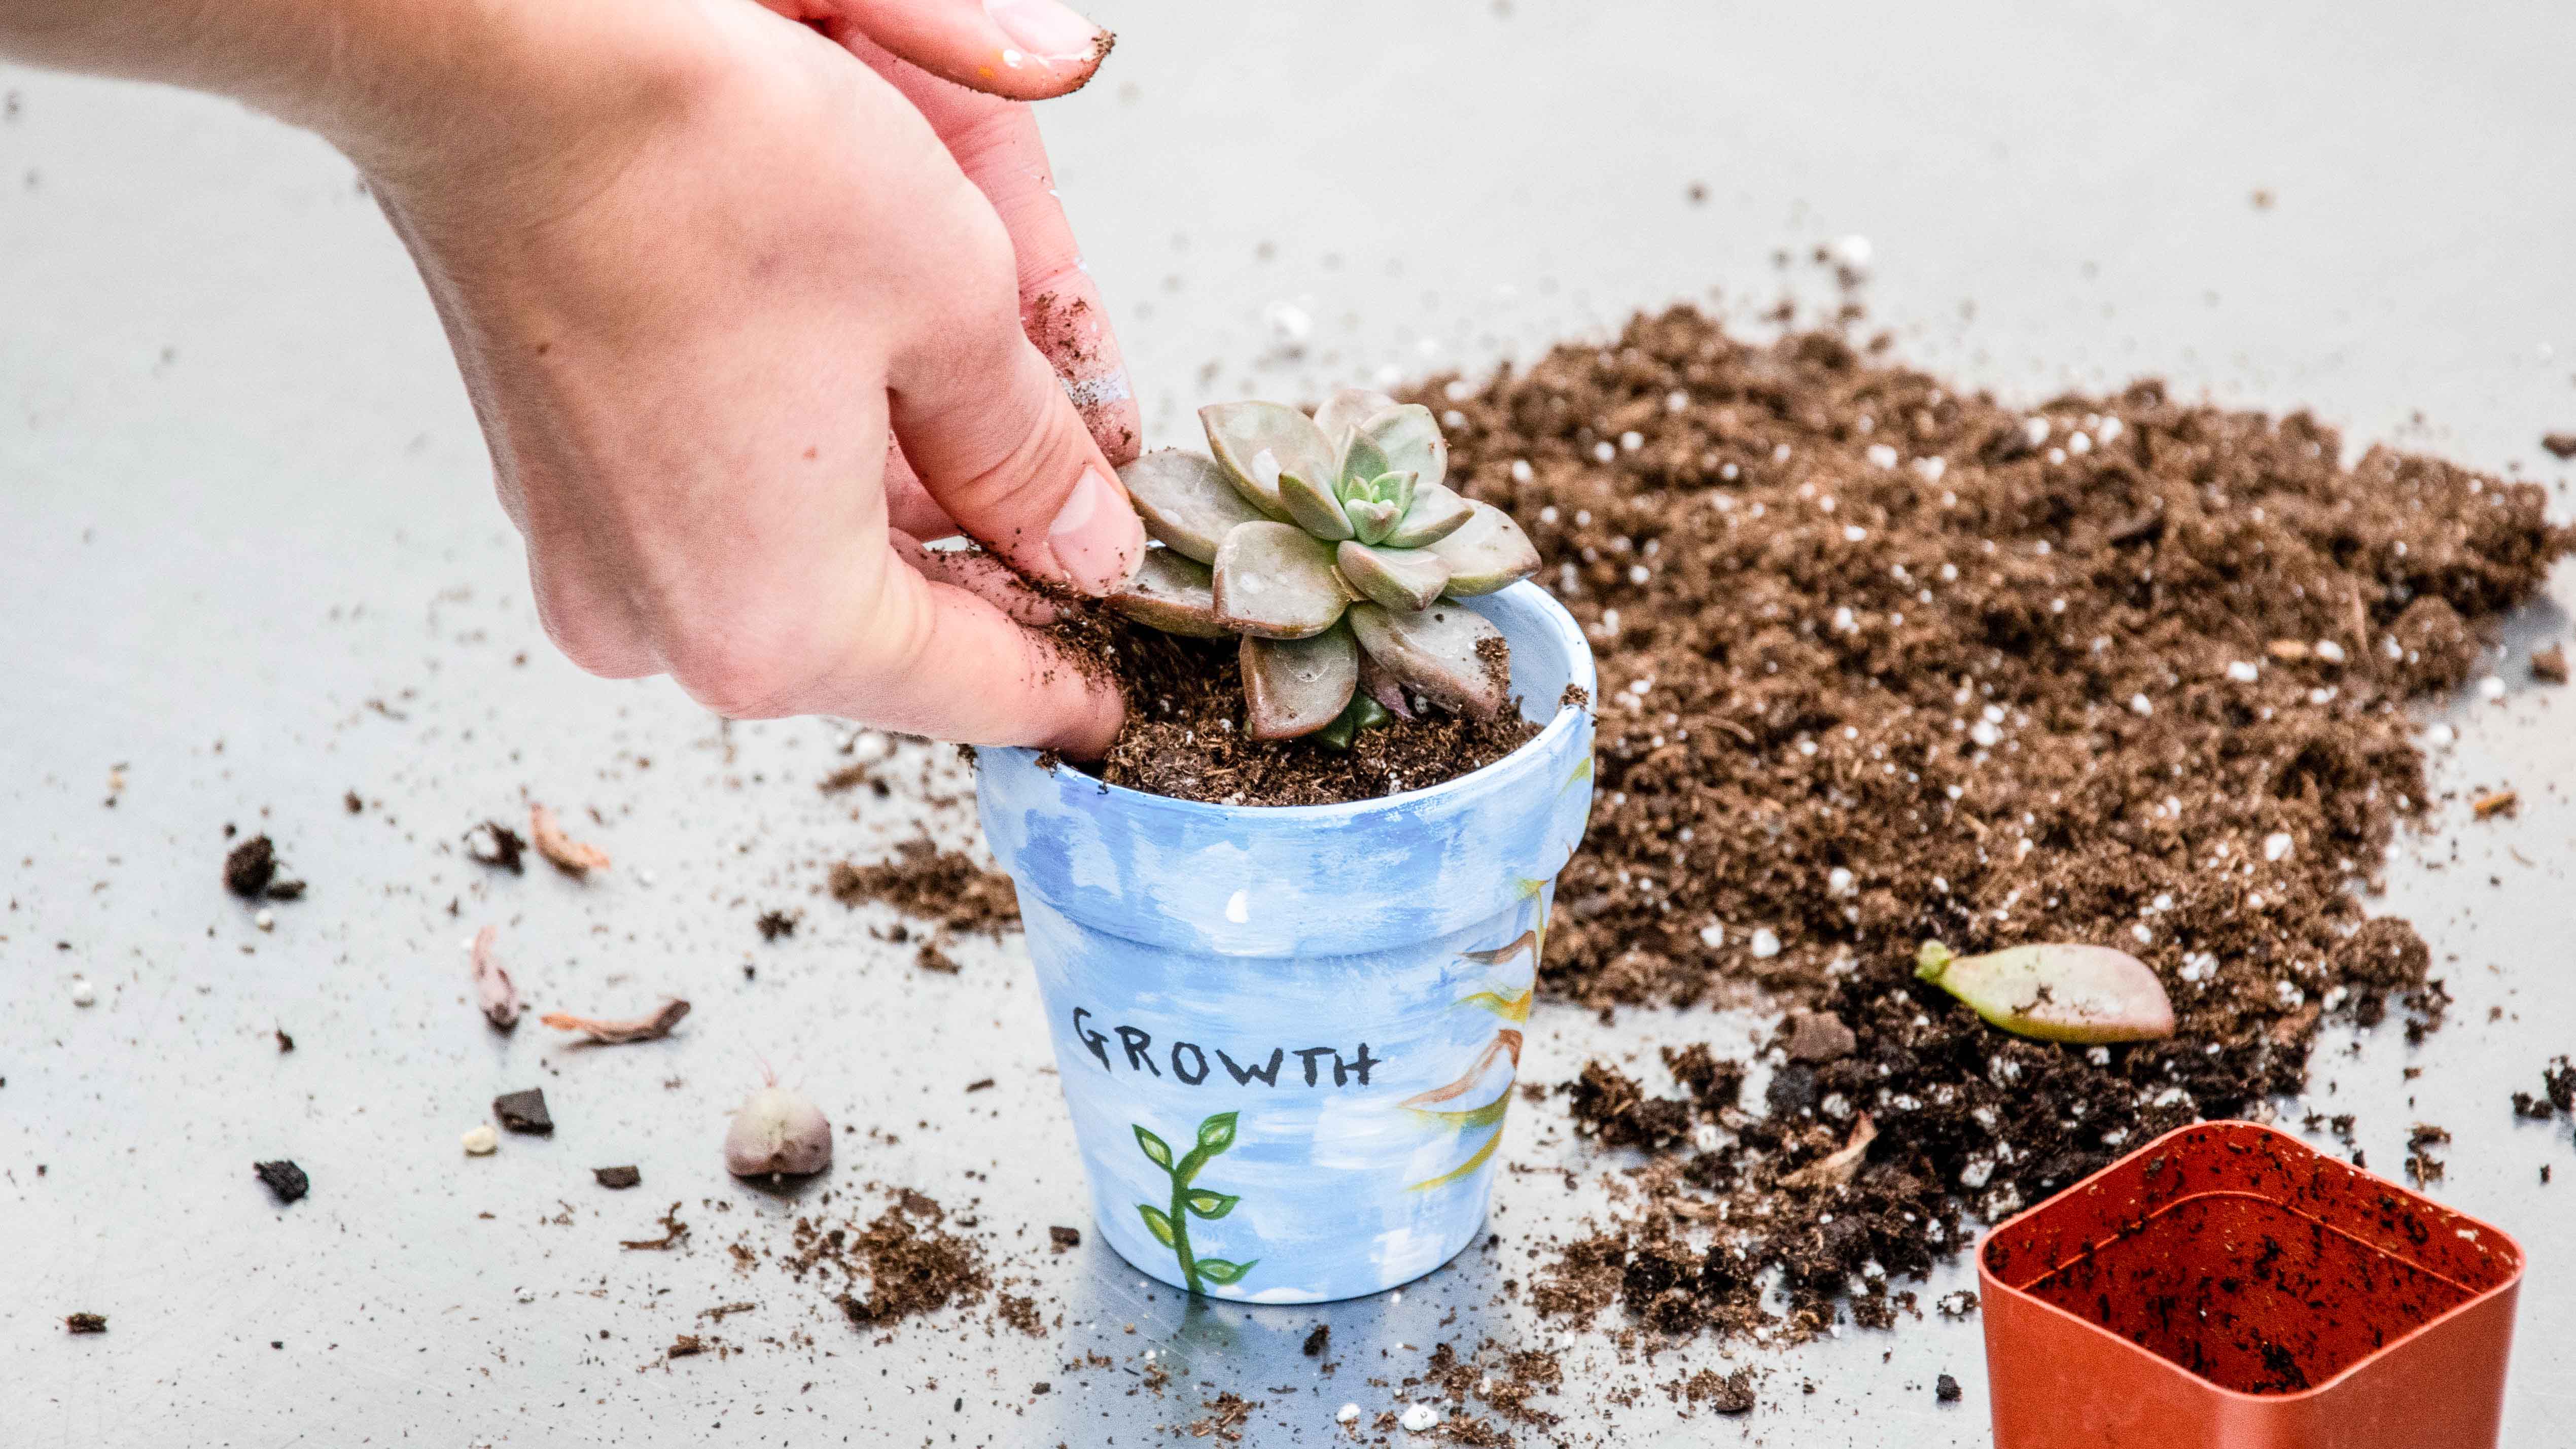 A hand is shown planting a succulent in a blue painted pot labeled "GROWTH," surrounded by soil and a small empty orange pot.